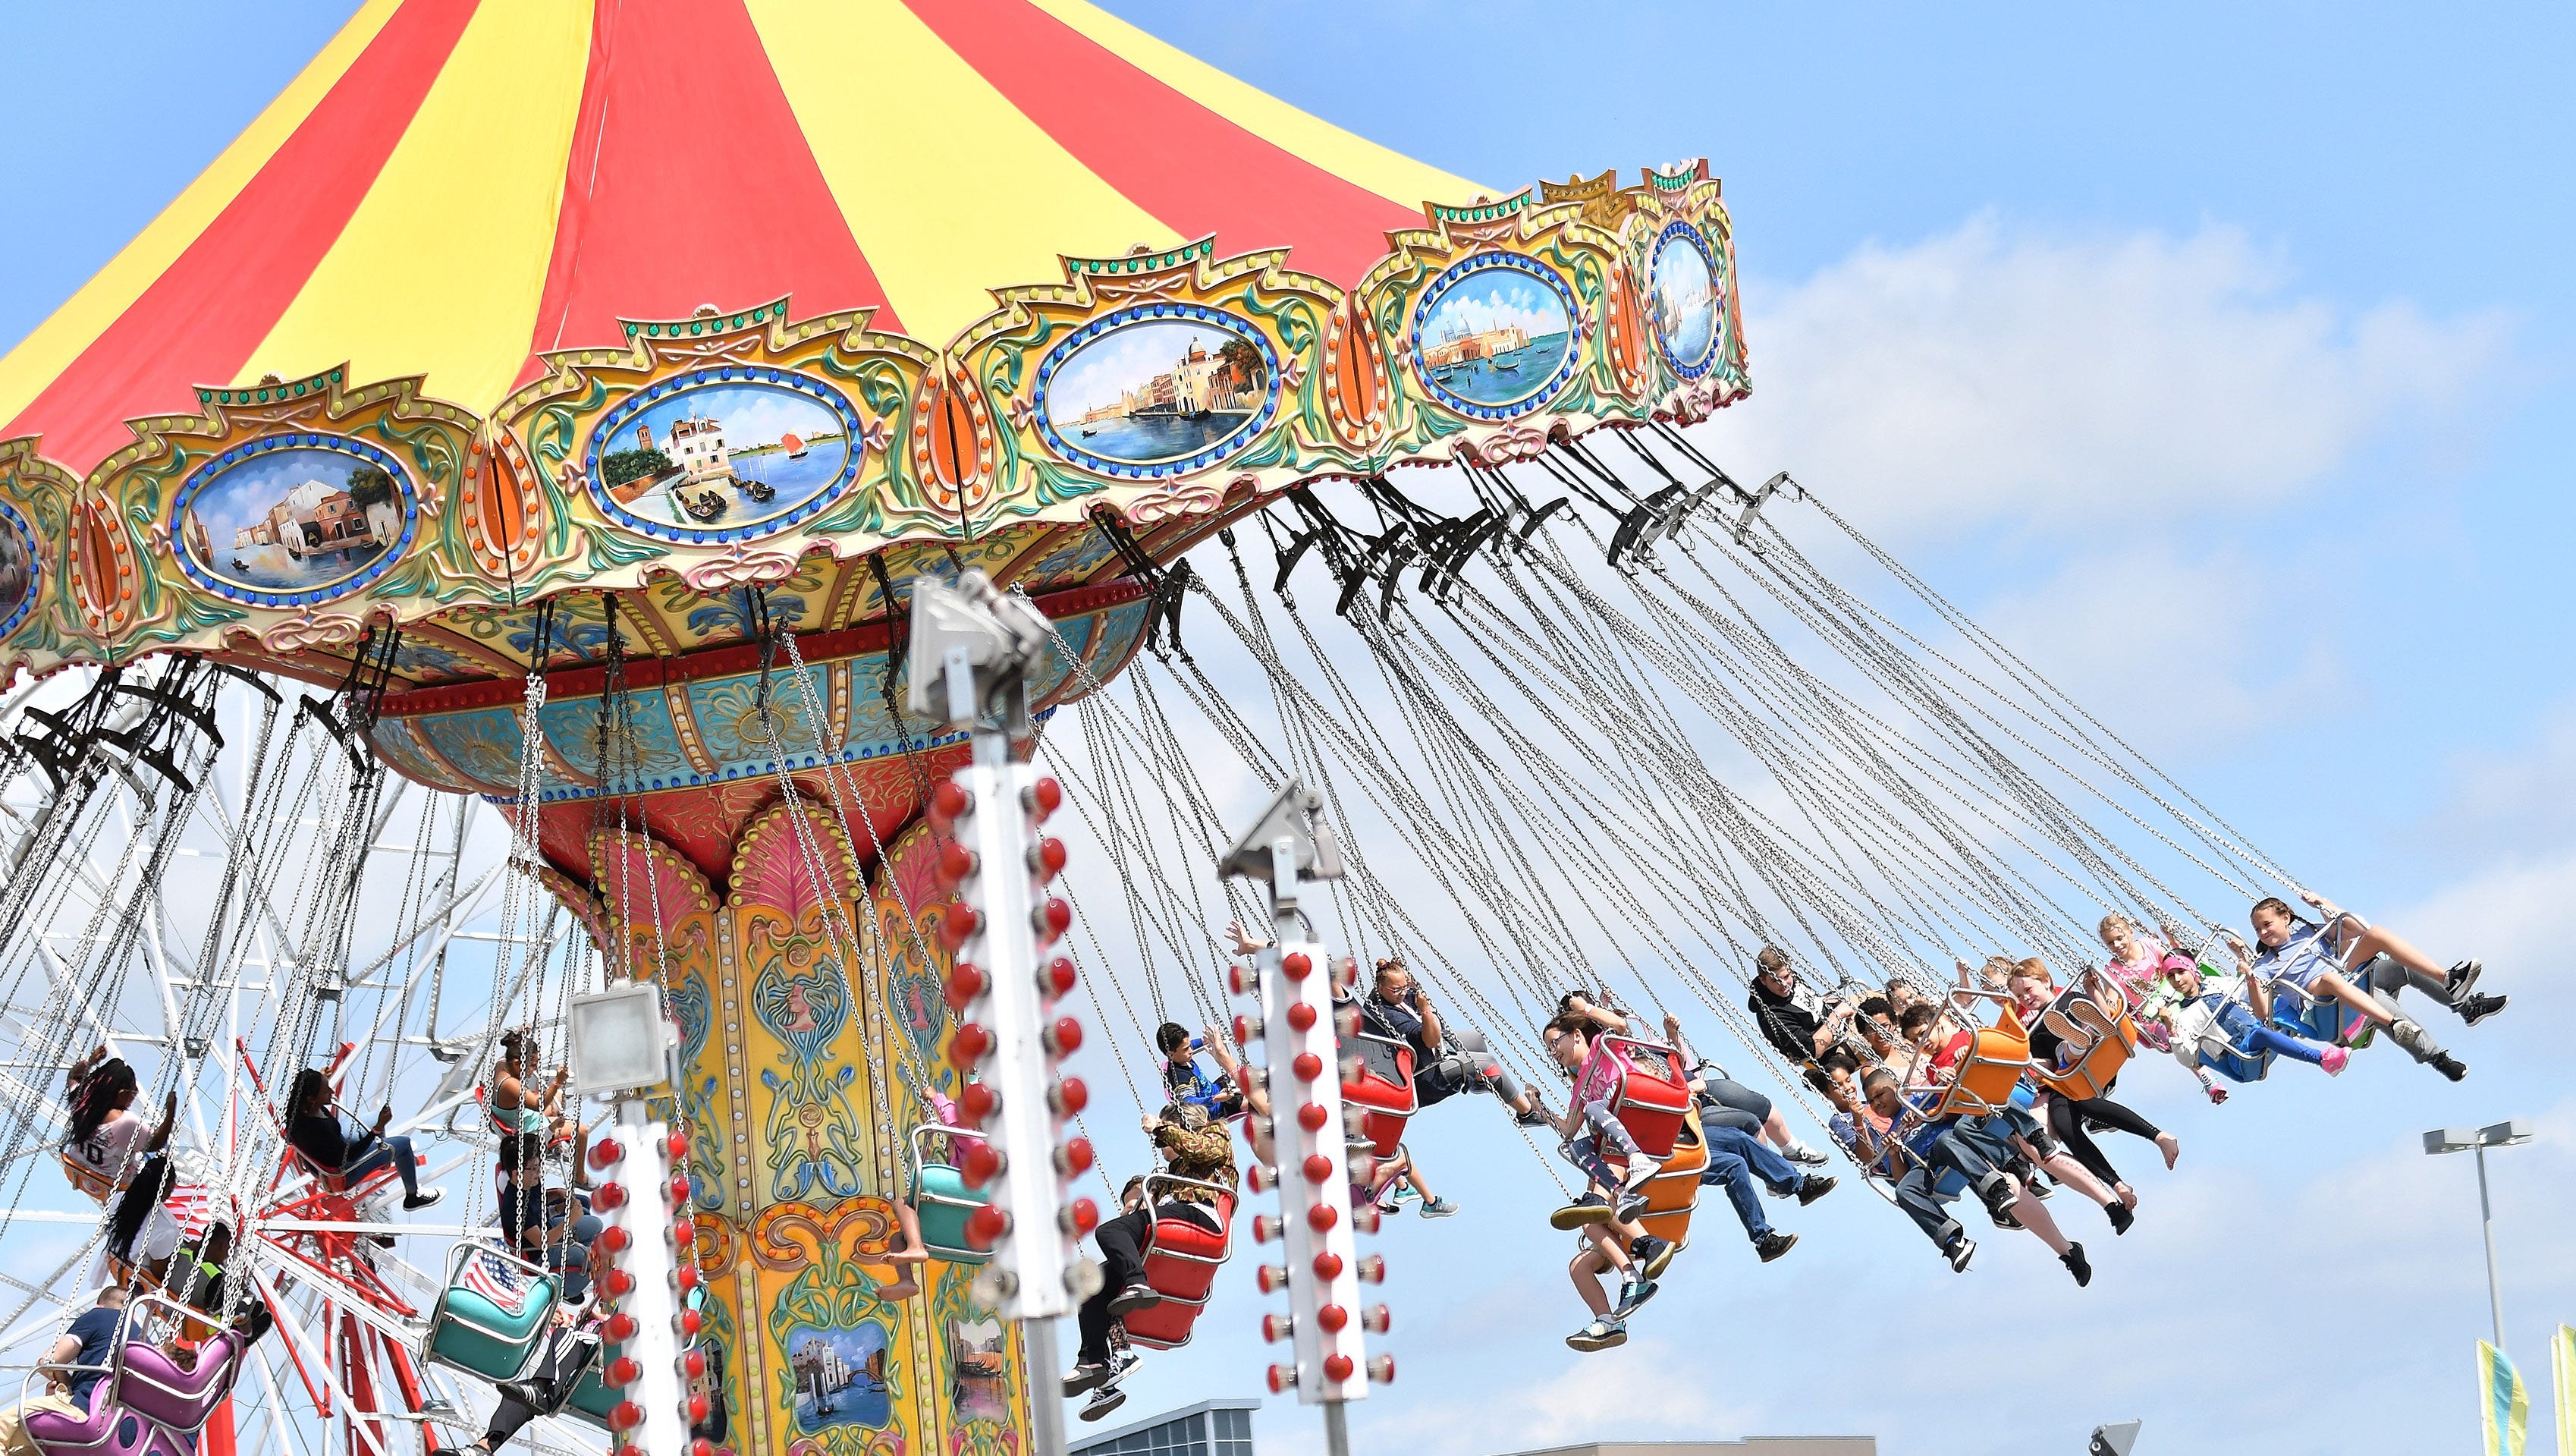 People ride the flying chairs at the Michigan State Fair.